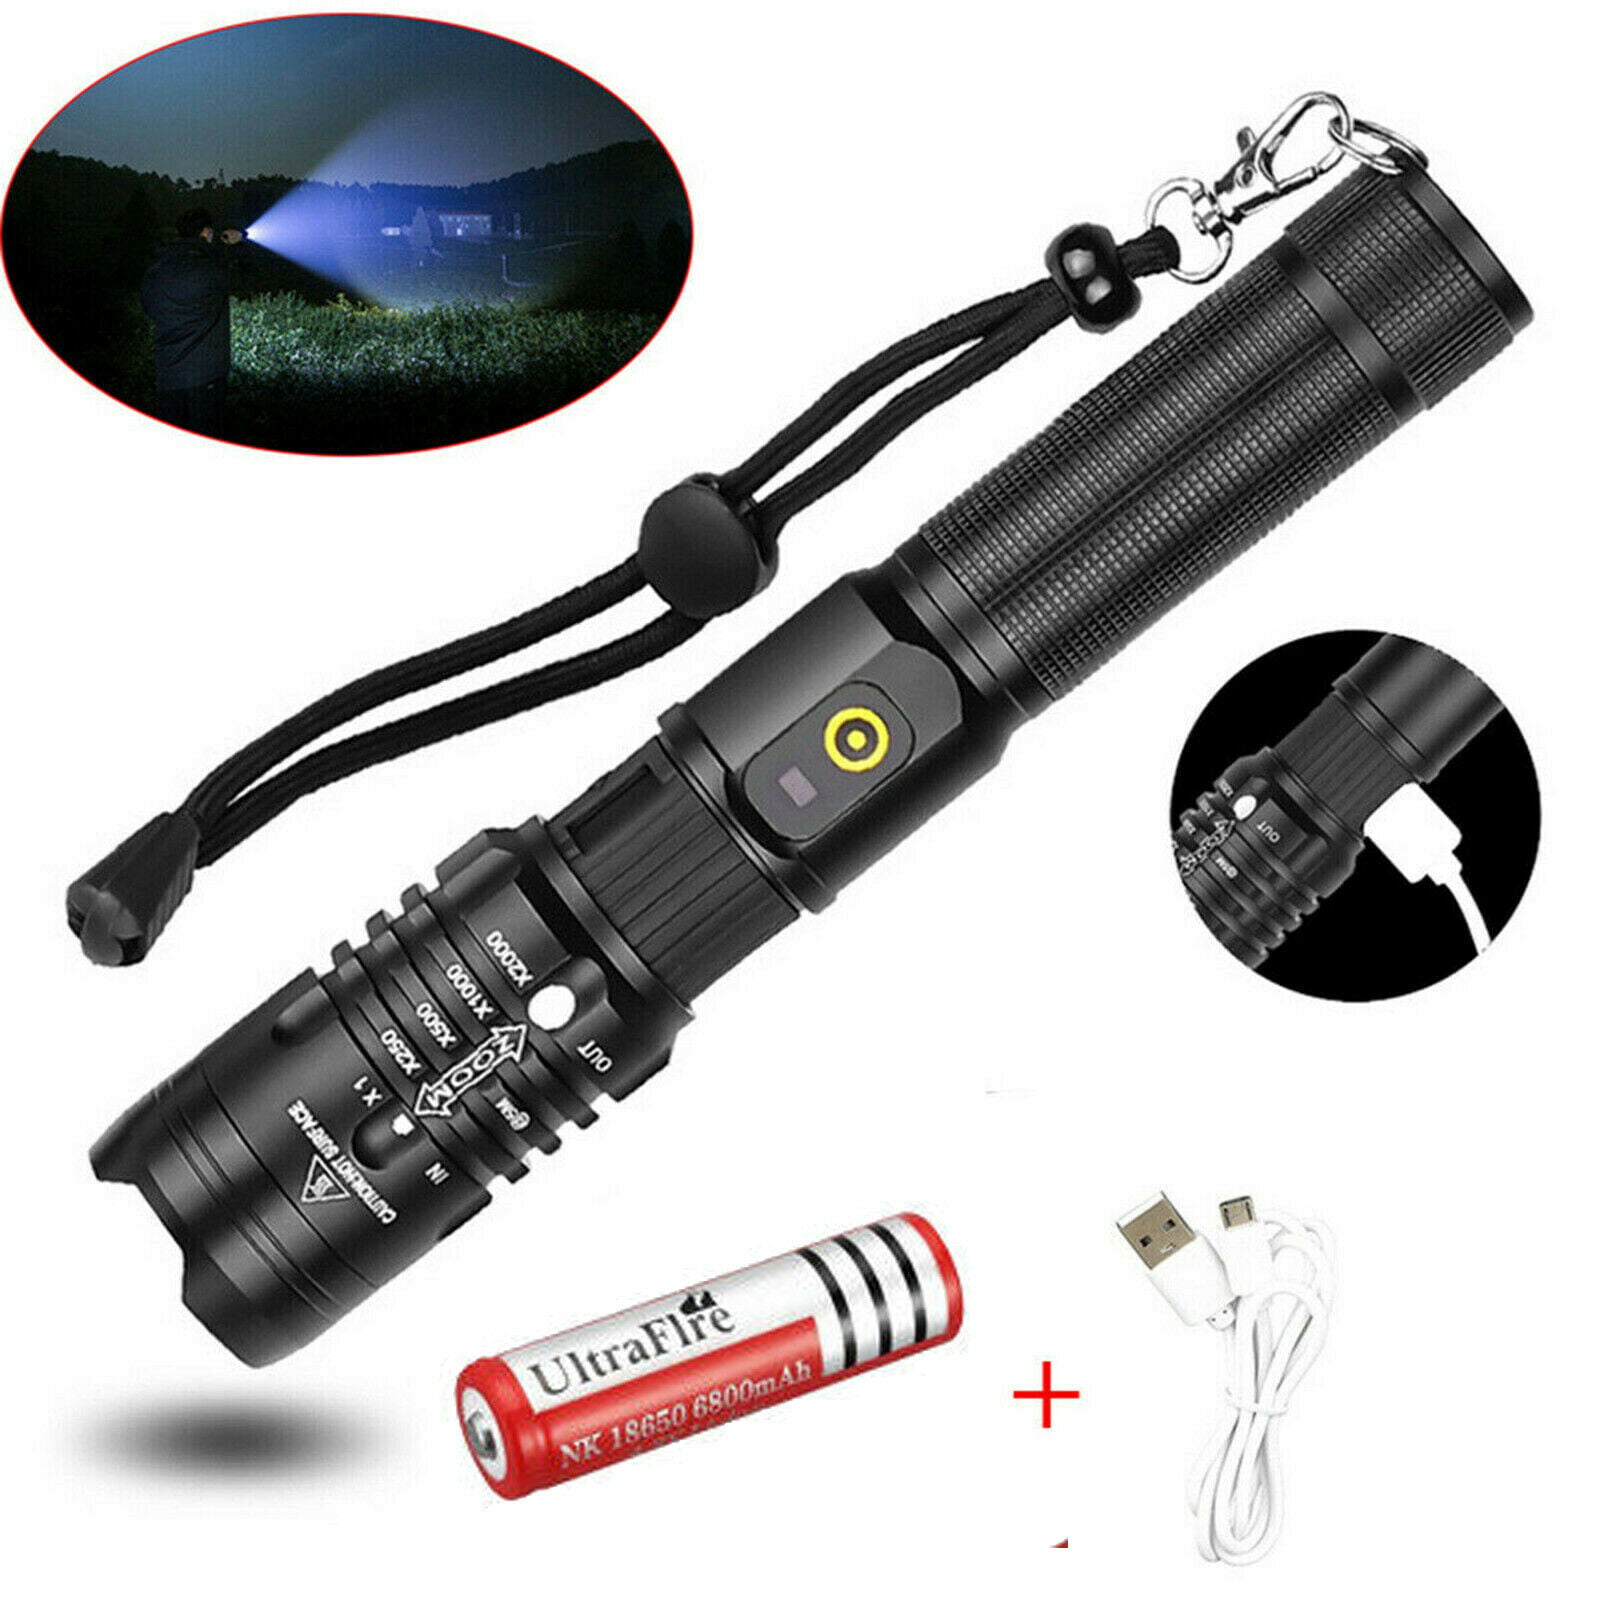 Super Bright Flashlight Zoomable 990000 High Lumens LED Rechargeable 18650 Torch